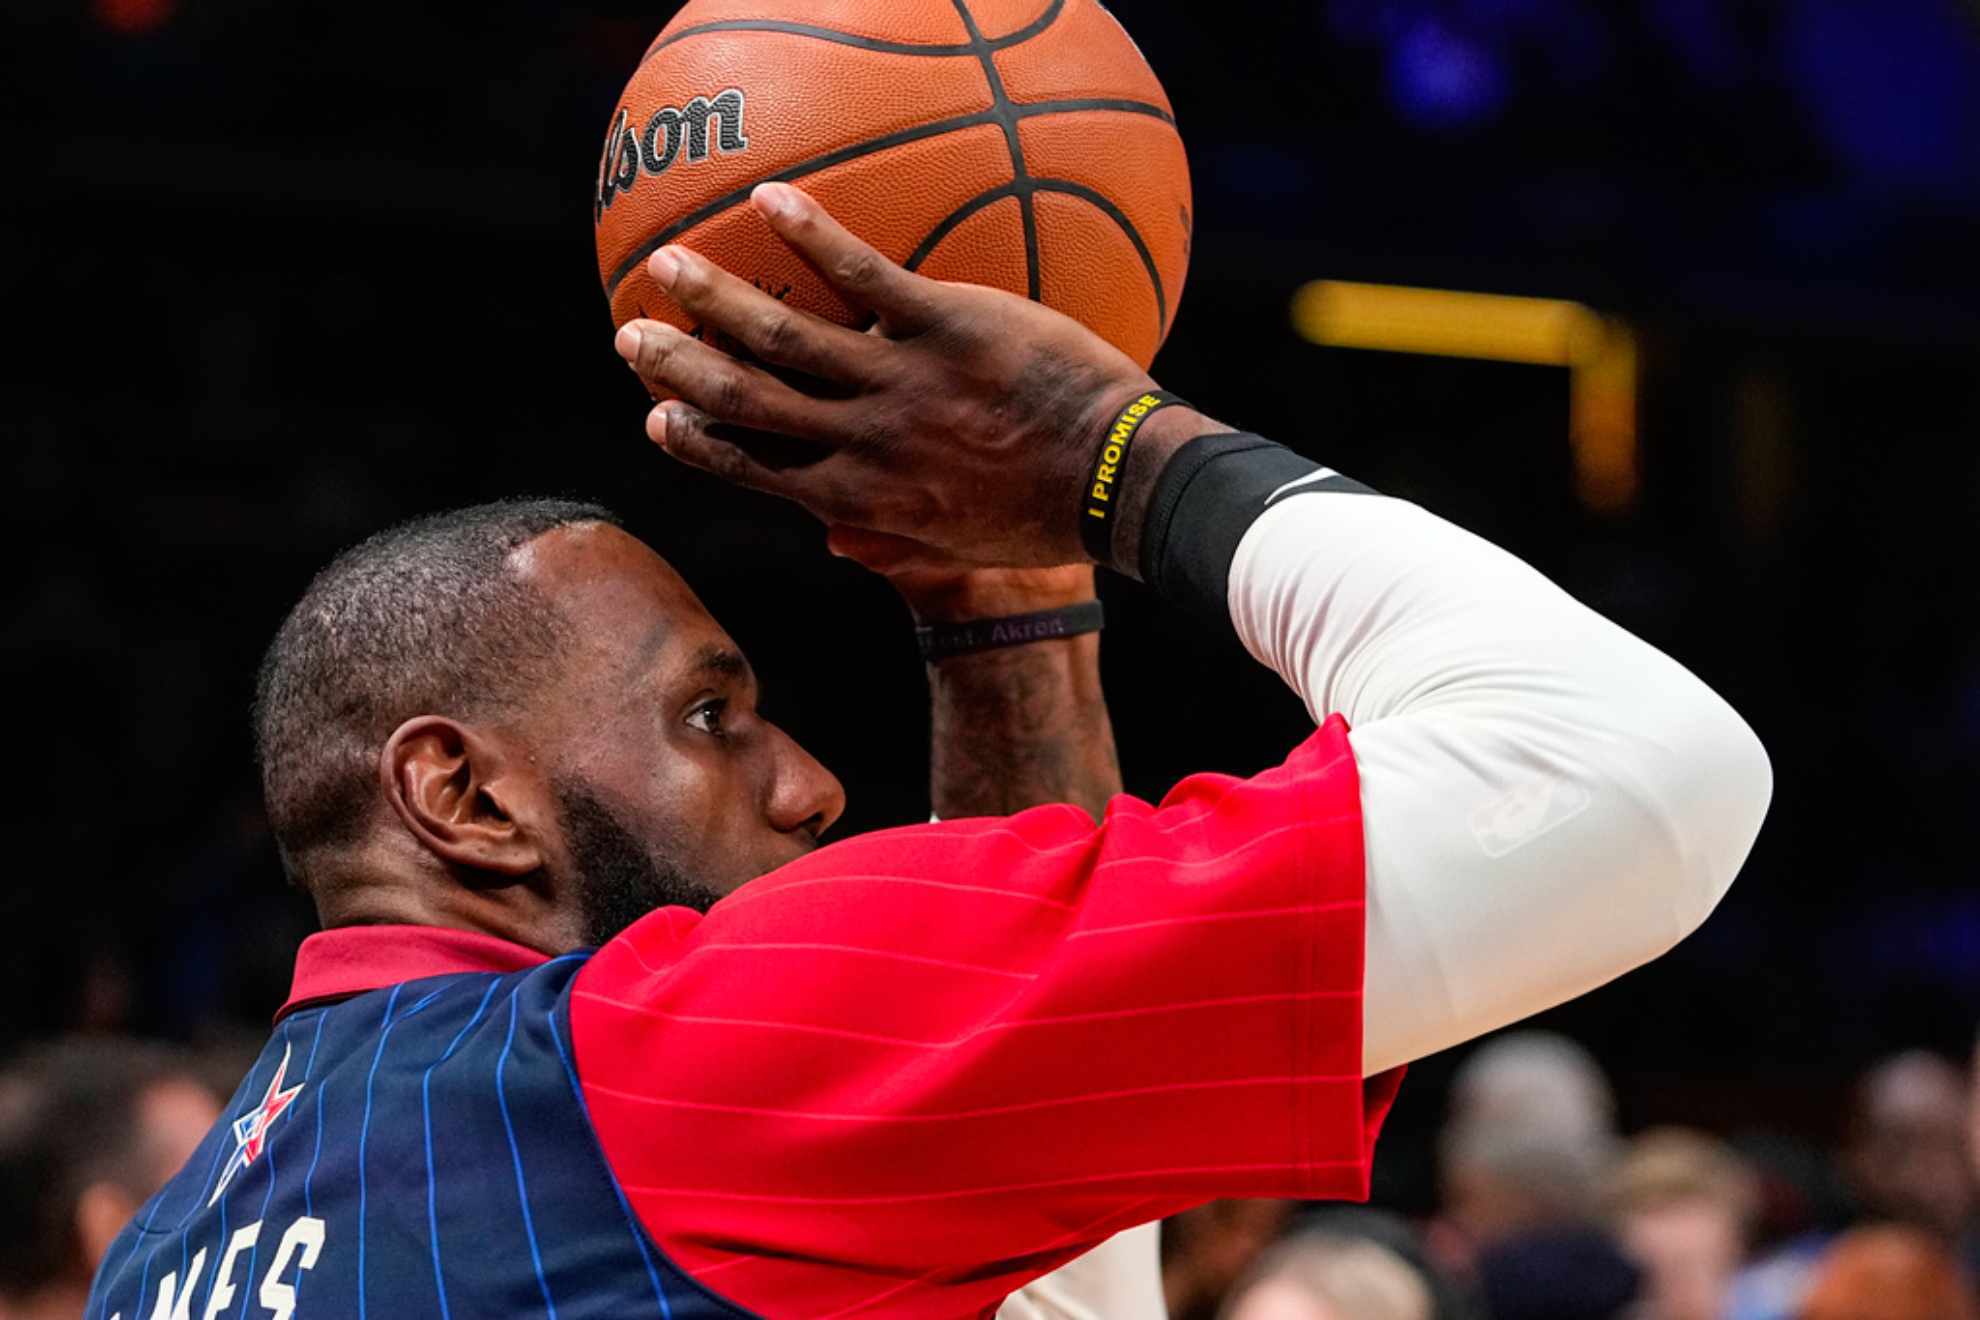 LeBron James (23) warms up before the start of the NBA All-Star basketball game in Indianapolis /